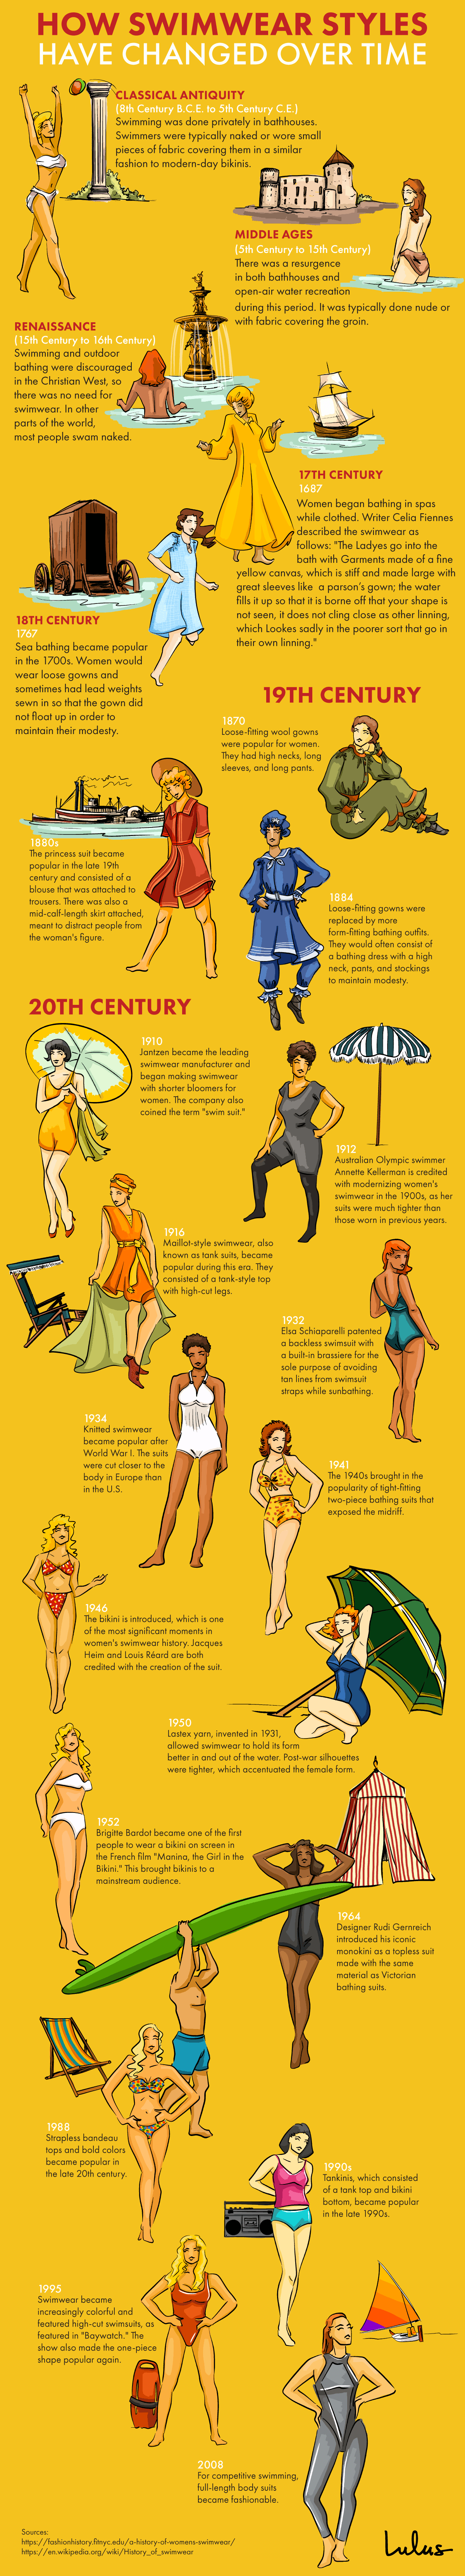 How Swimwear Styles Have Changed Over Time - Infographic